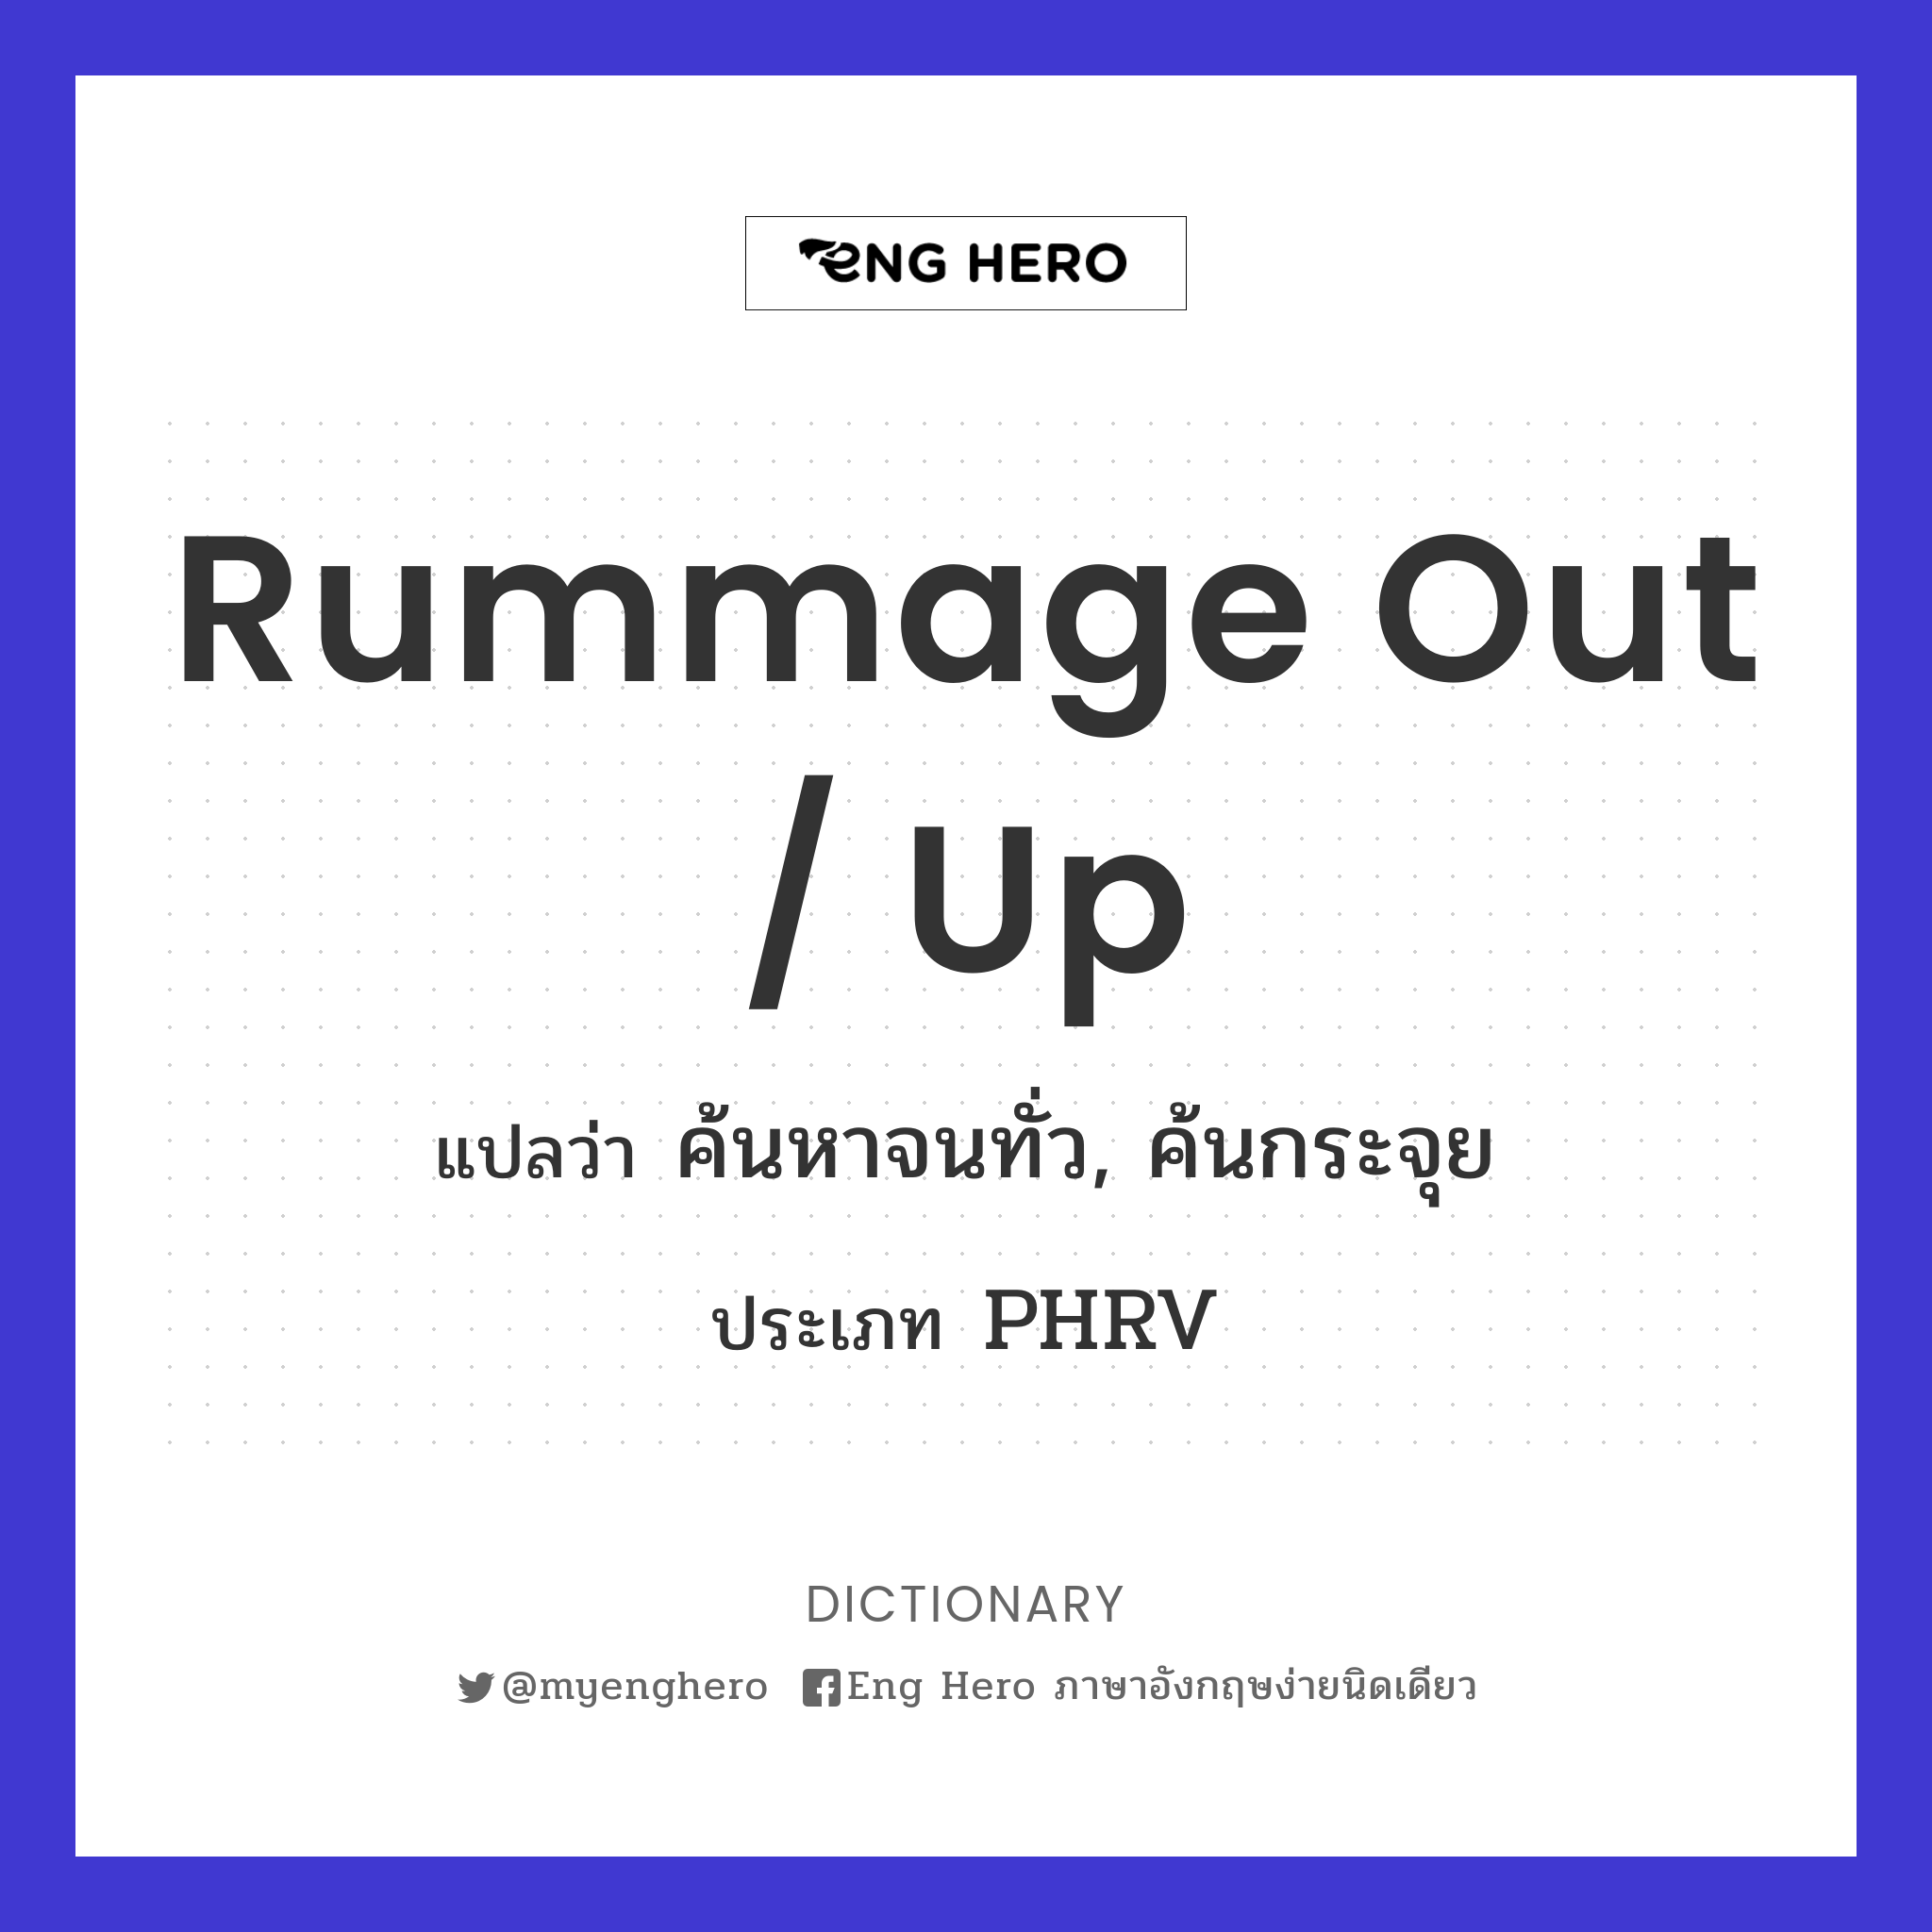 rummage out / up